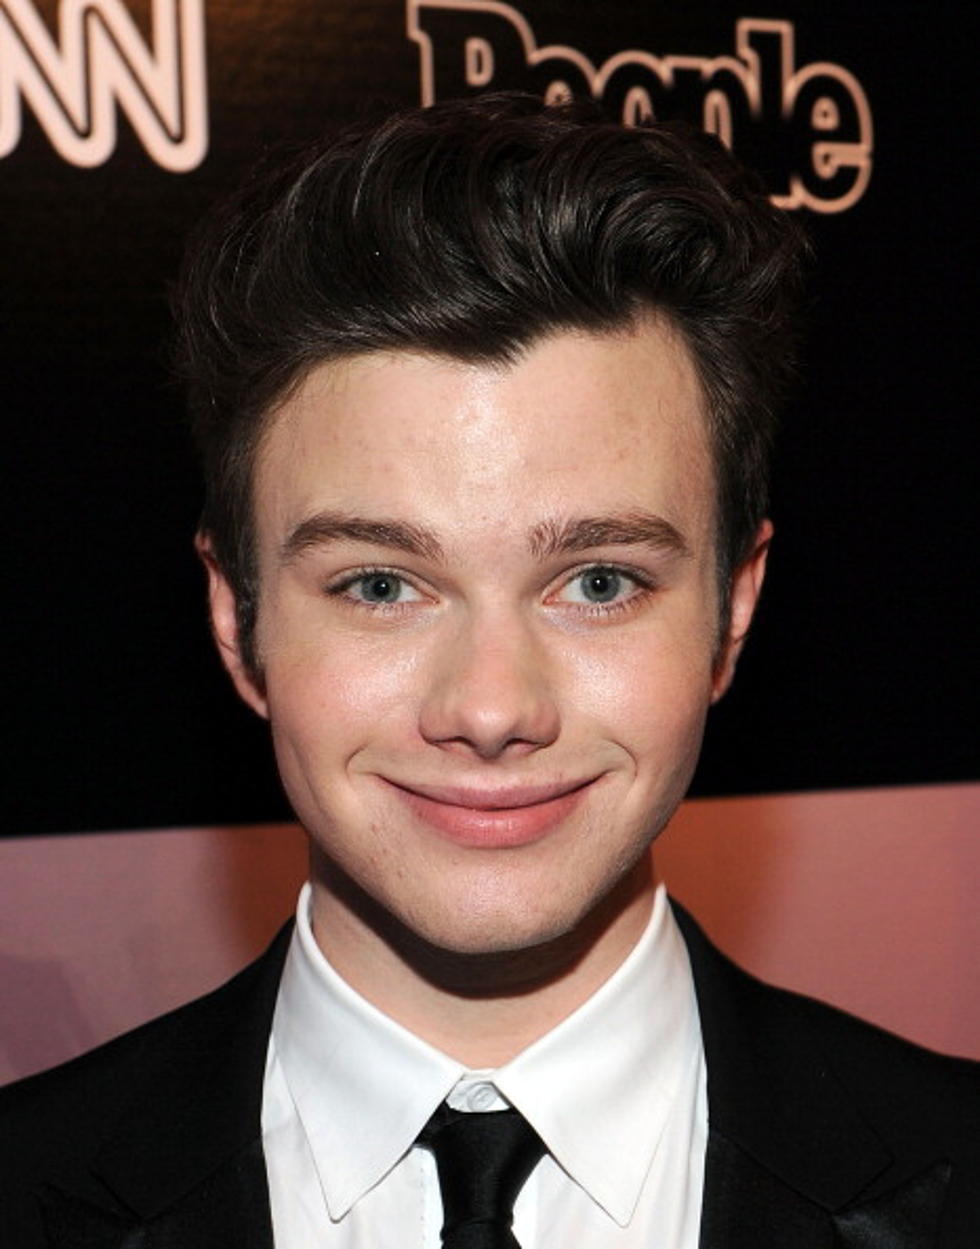 ‘Glee’s’ Kurt, Chris Colfer, Is One of the Celebrities Celebrating a Birthday Today